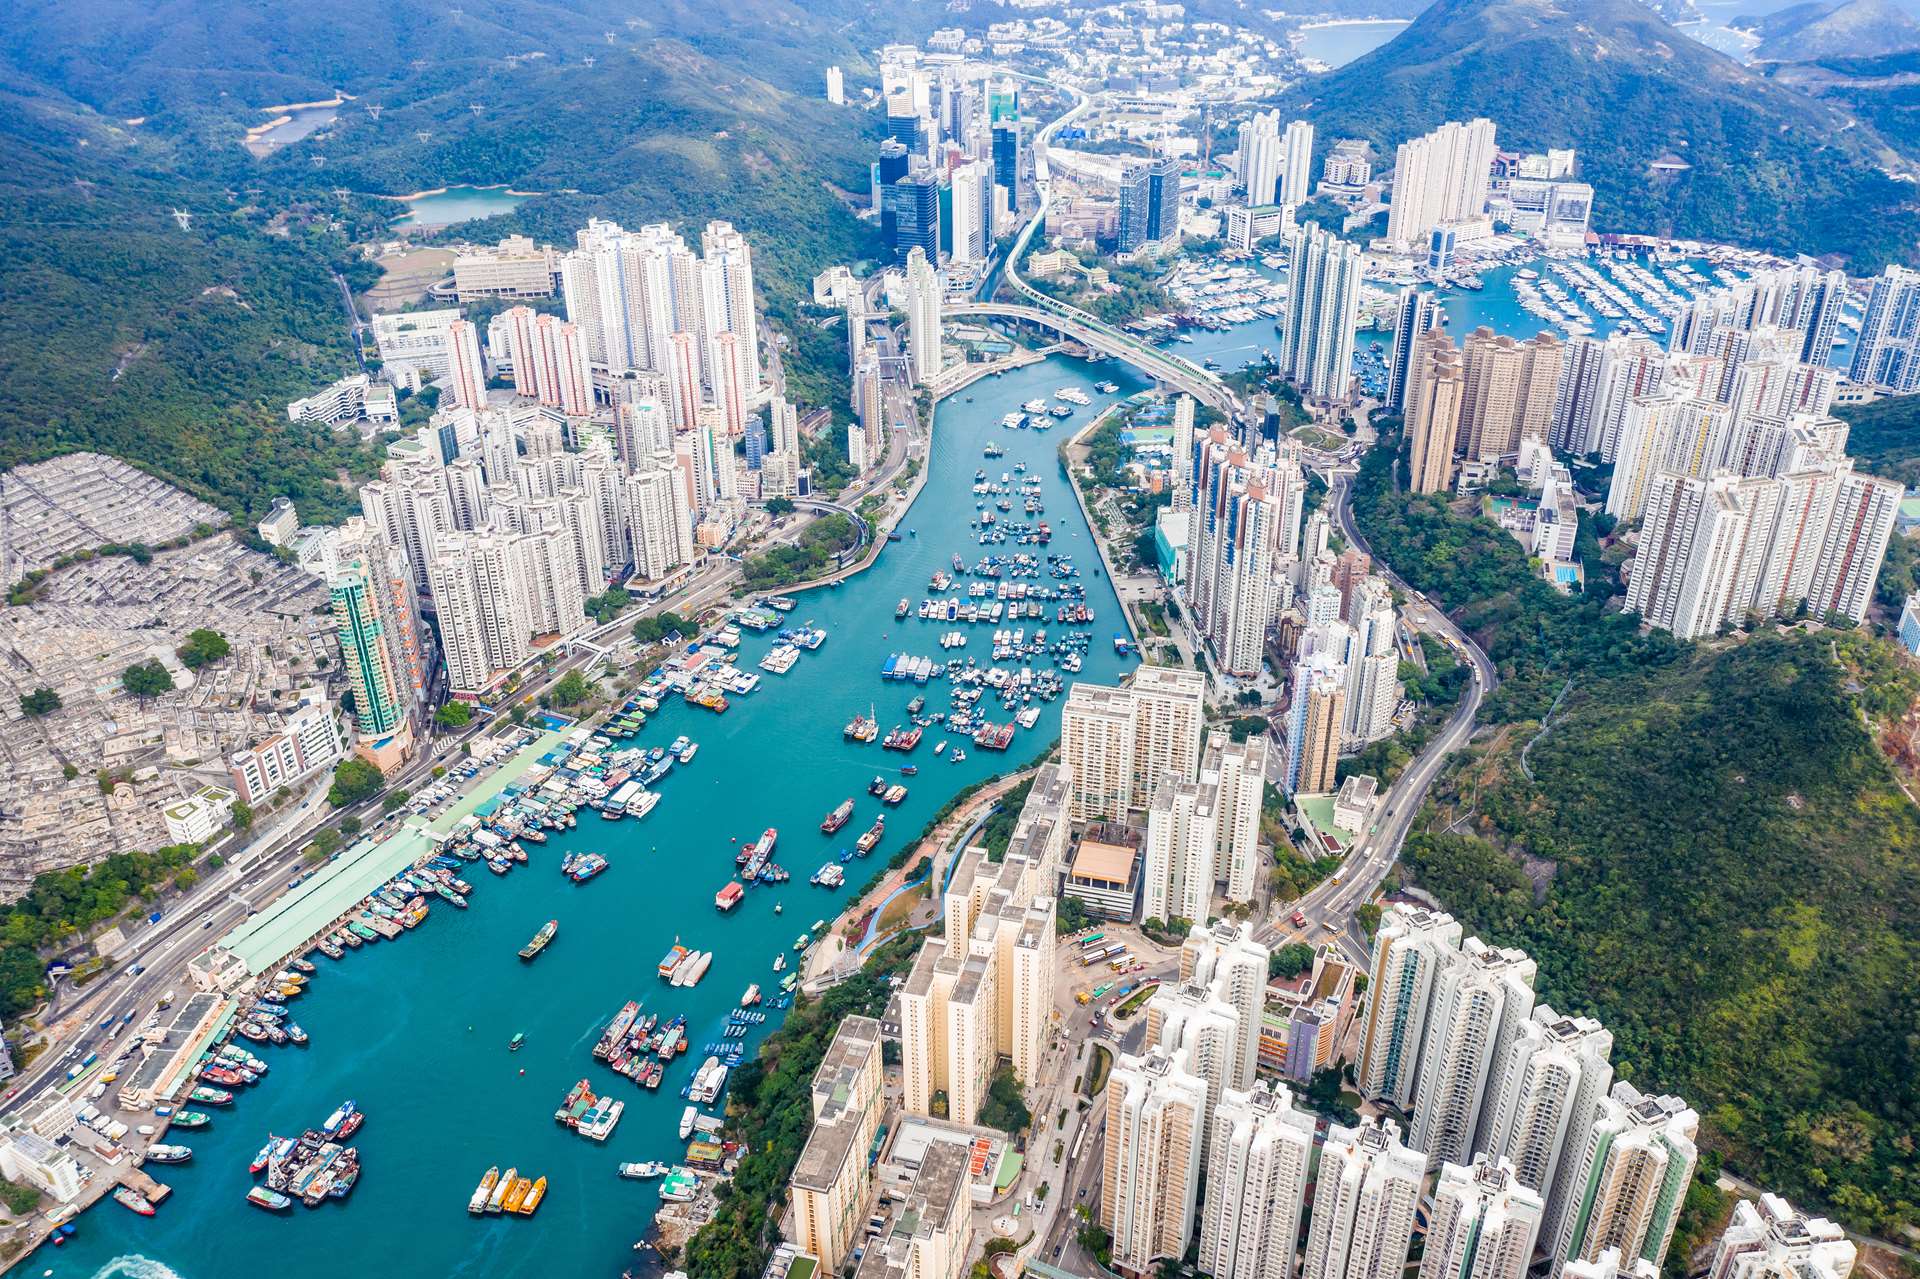 Details of eligibility and procedures concerning the application of the 2nd tranche of subsidy under Employment Support Scheme (ESS) unveiled by the HKSAR Government on August 18, 2020